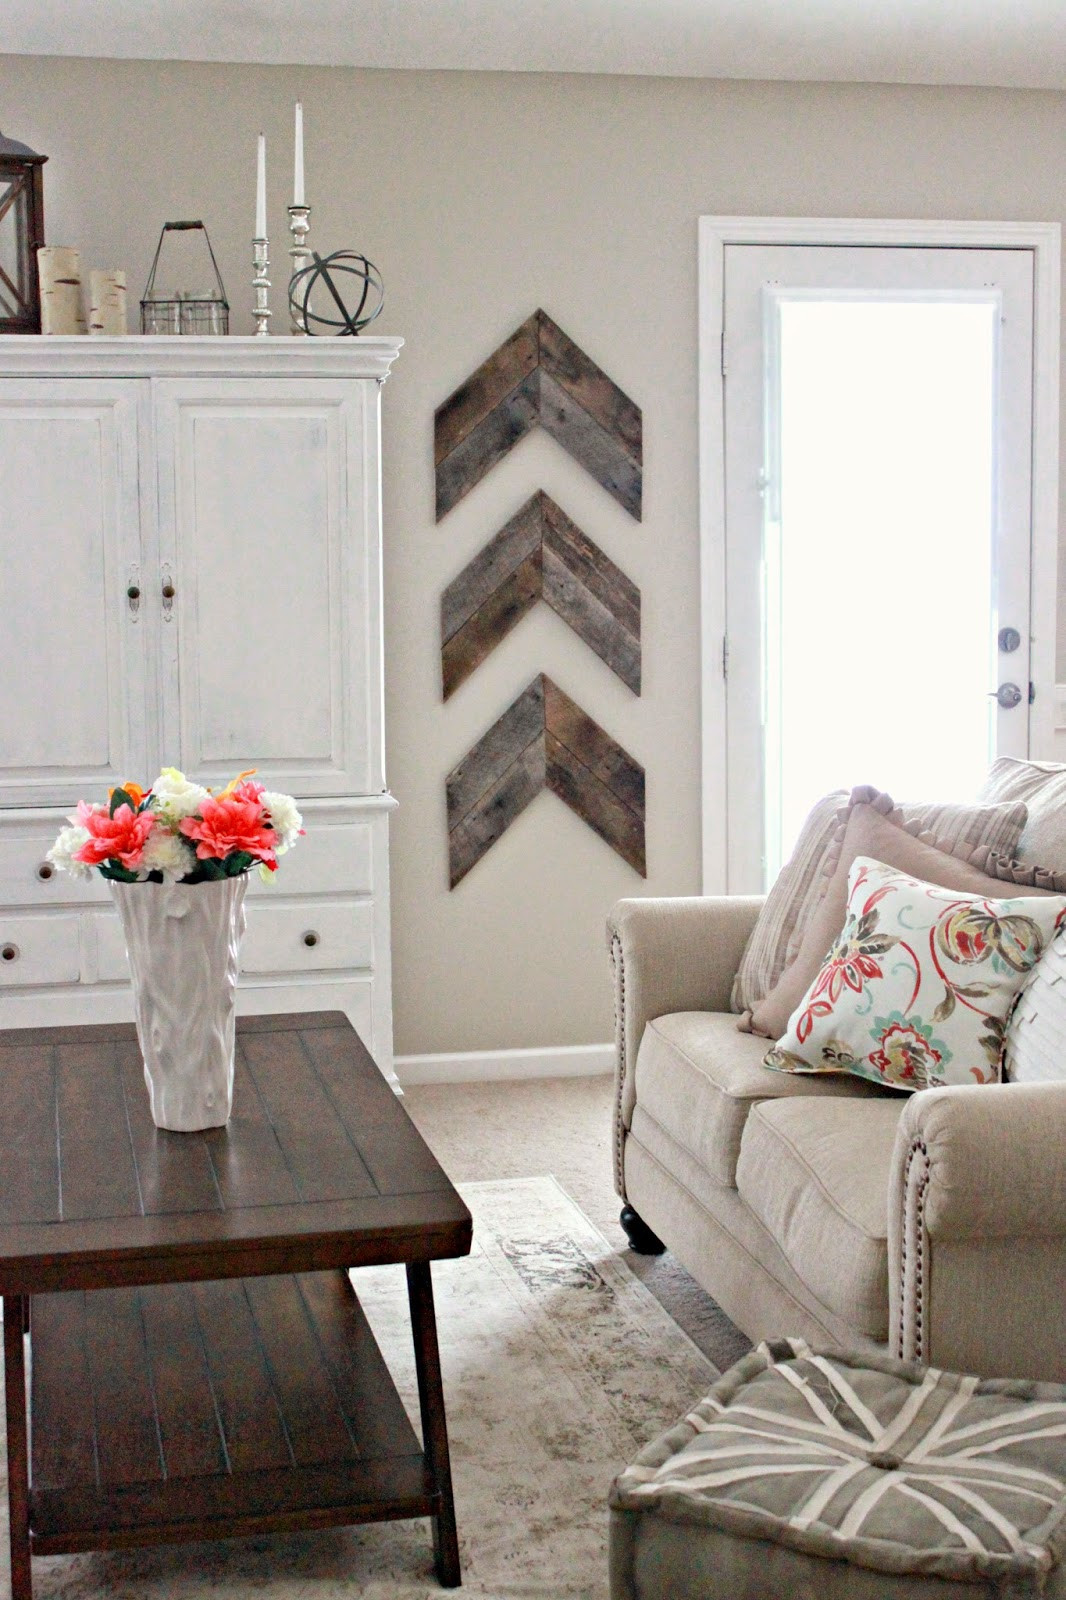 DIY Living Room Decor Pinterest
 15 Striking Ways to Decorate with Arrows